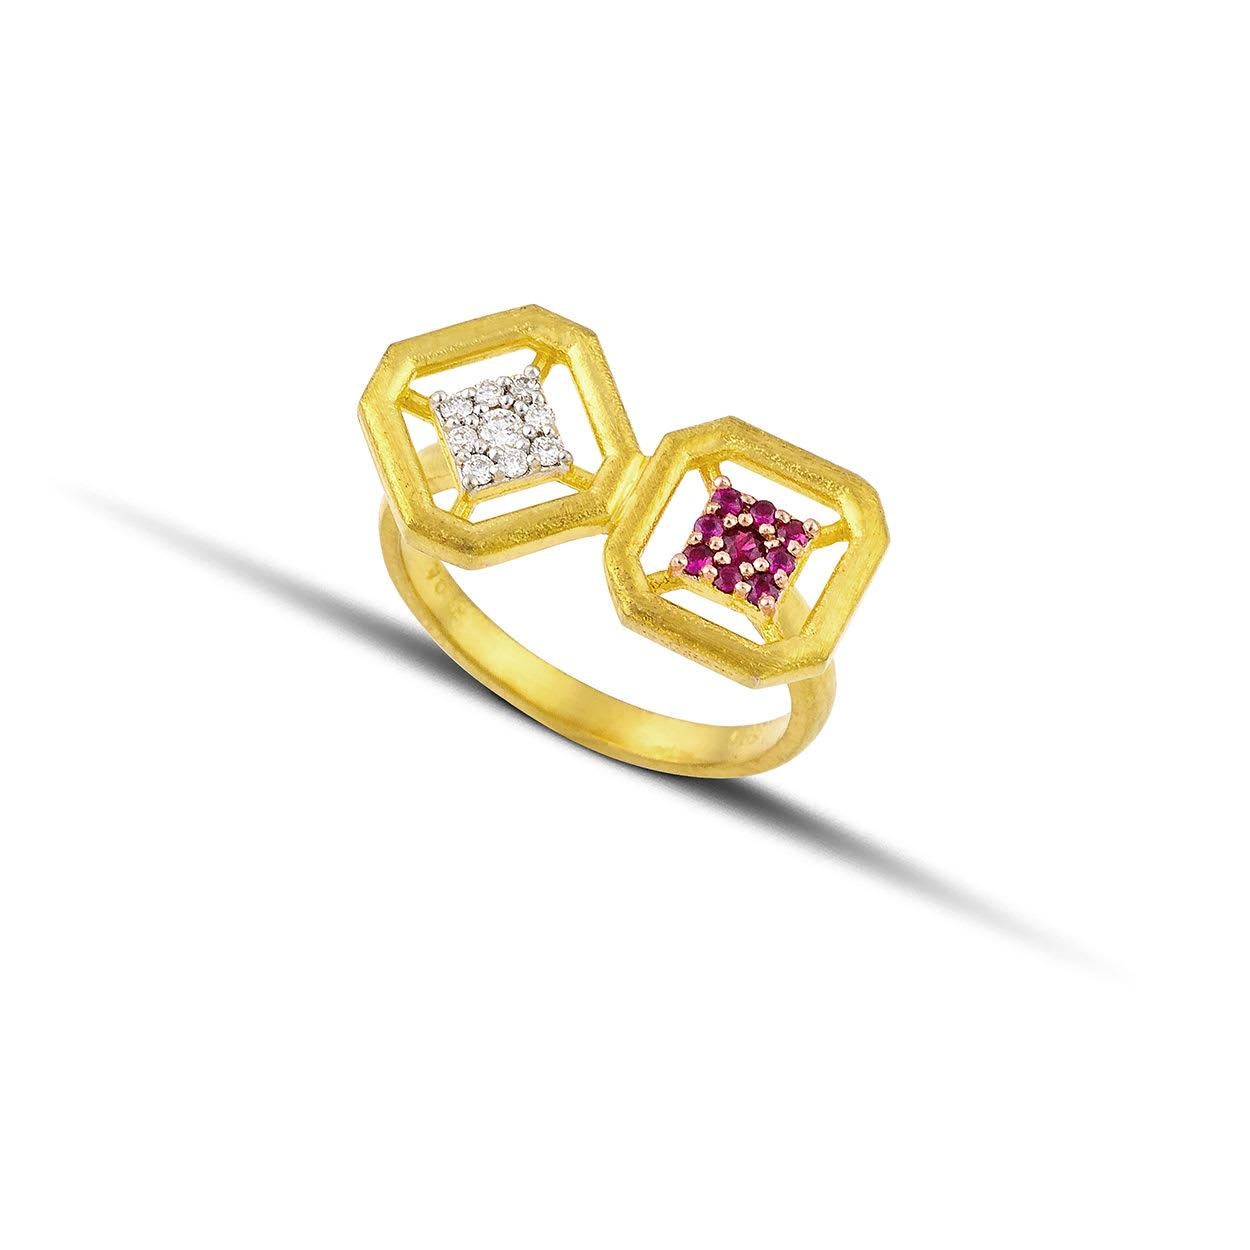 100% recycled 14K Yellow Gold, plated with 22K Gold

Diamond

Ruby

Size: on order

Ancient Gold Jewelry collection inspired by the antiquity, for young women and men, called Apollonian.

Apollonian is

The beauty of youth
The antiquity
The love of